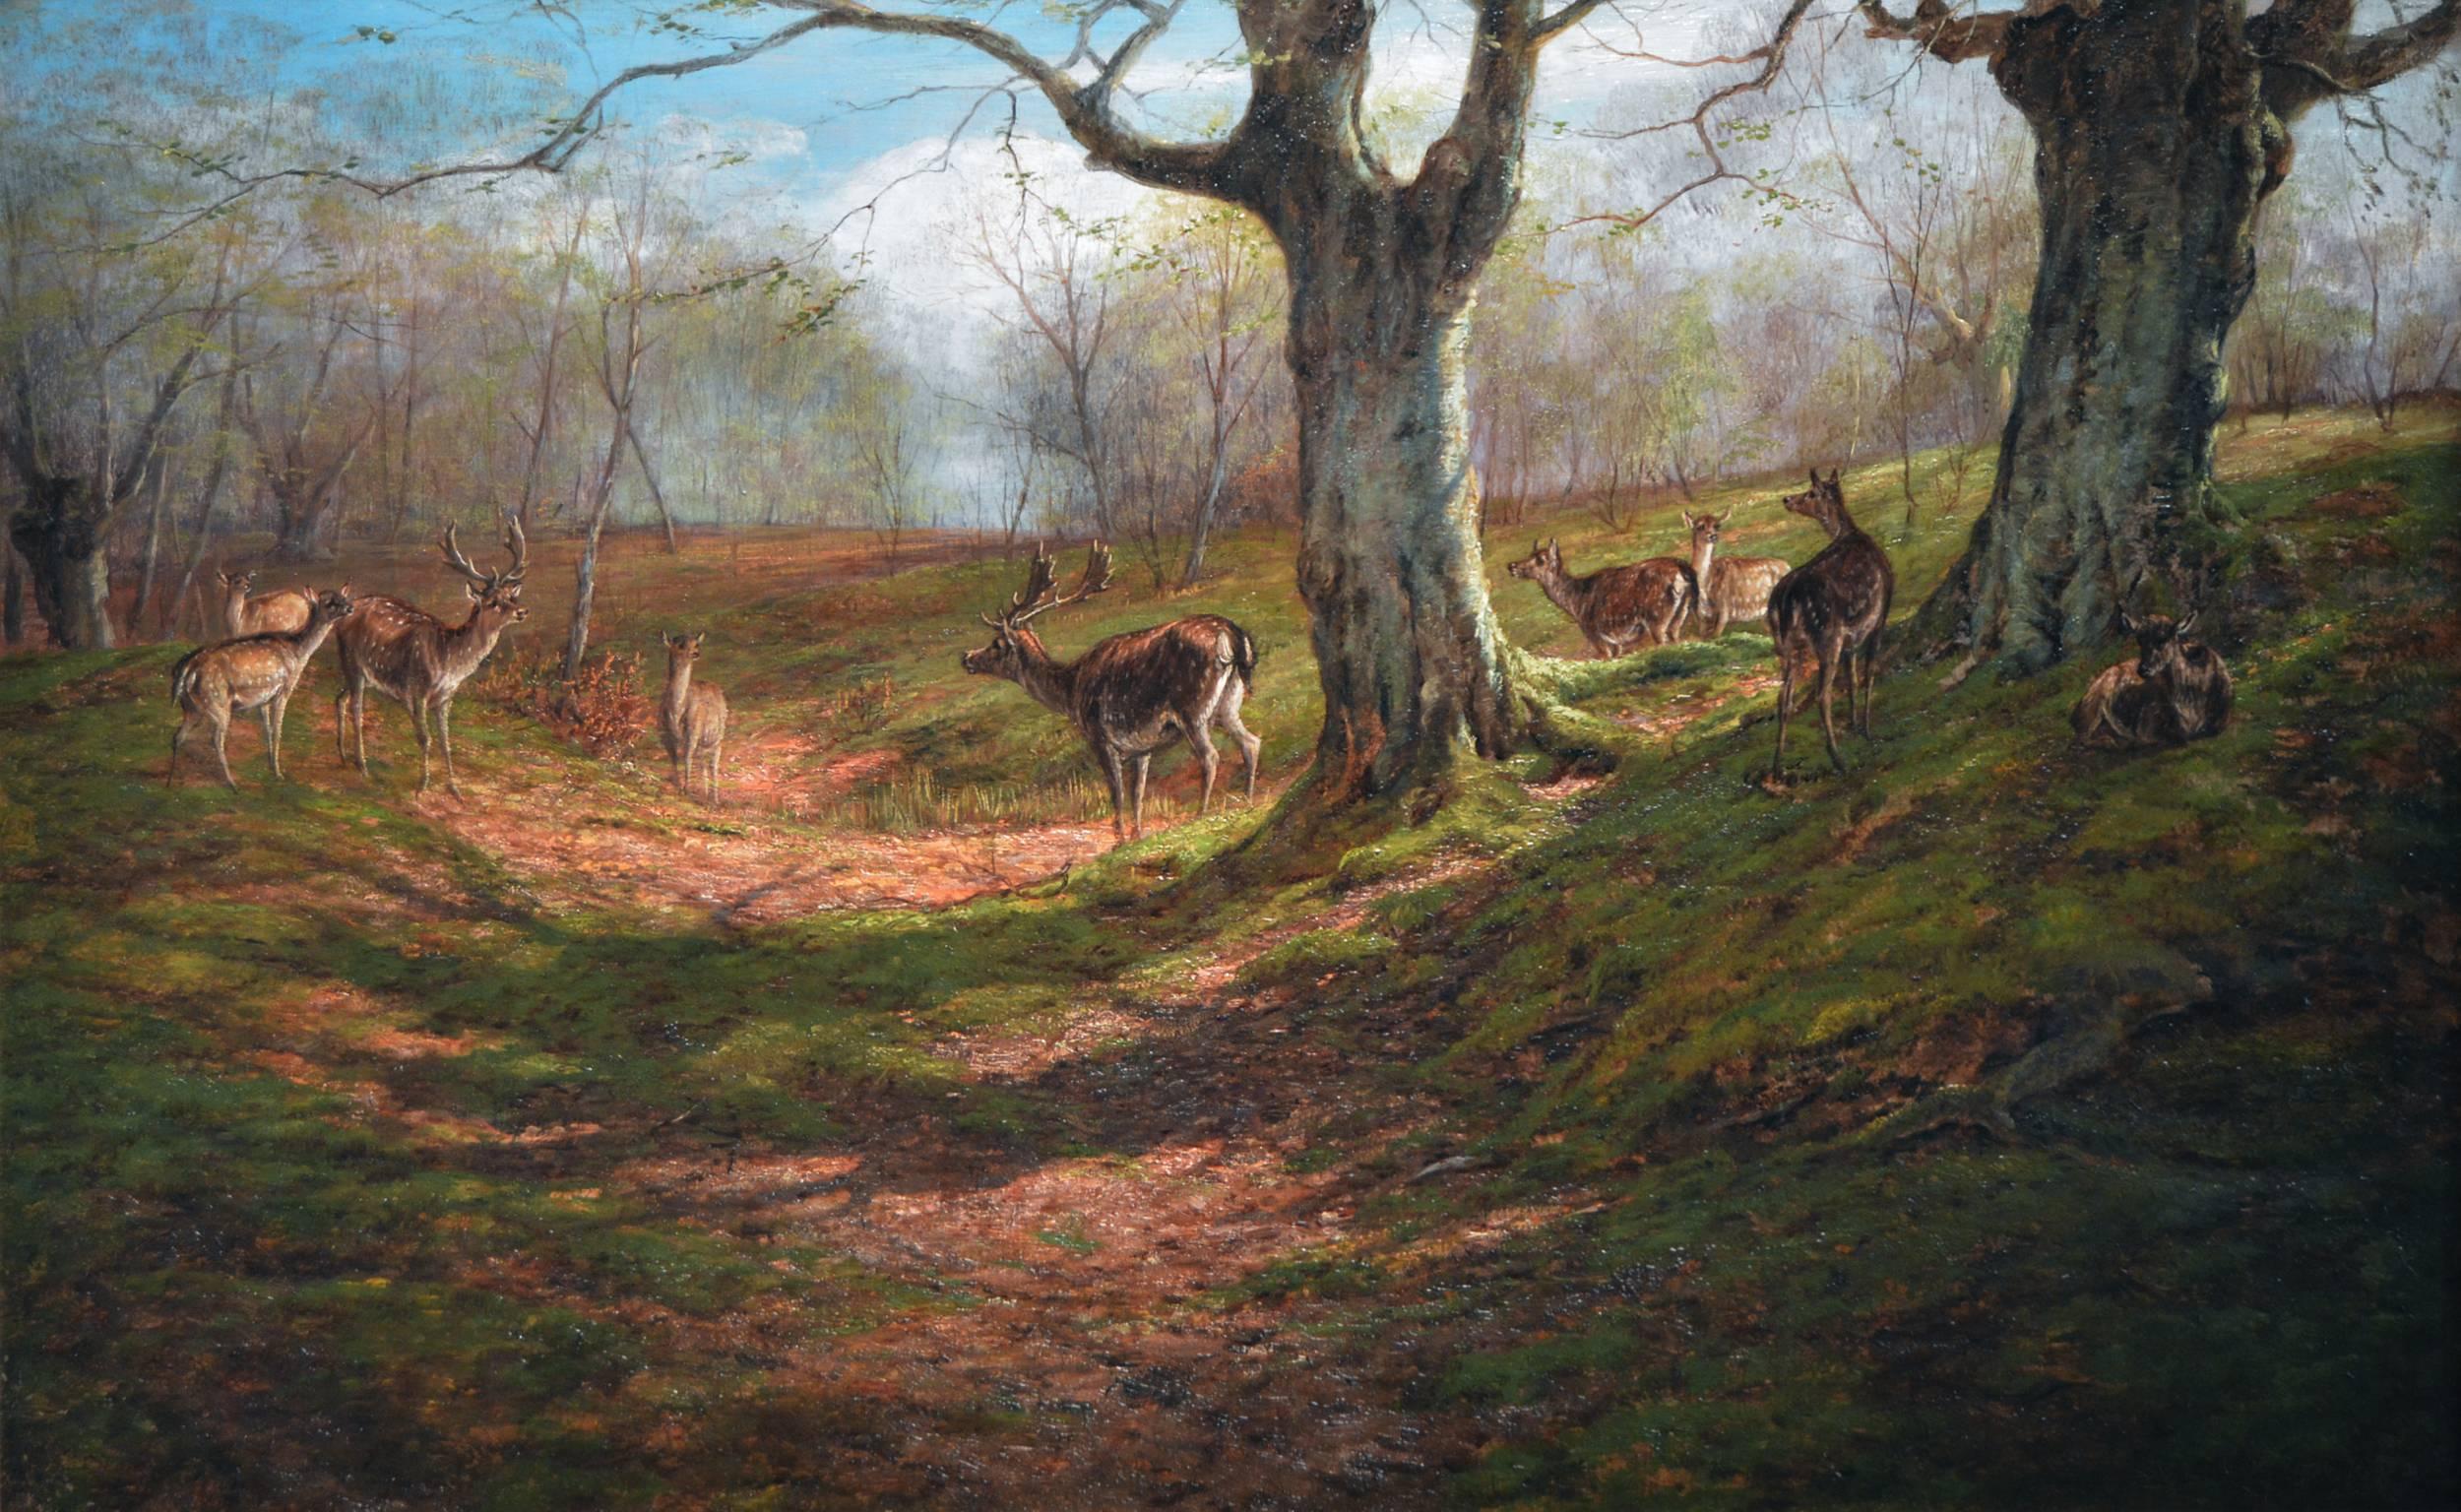 Deer in Park, oil on canvas - Painting by William Luker Sr.